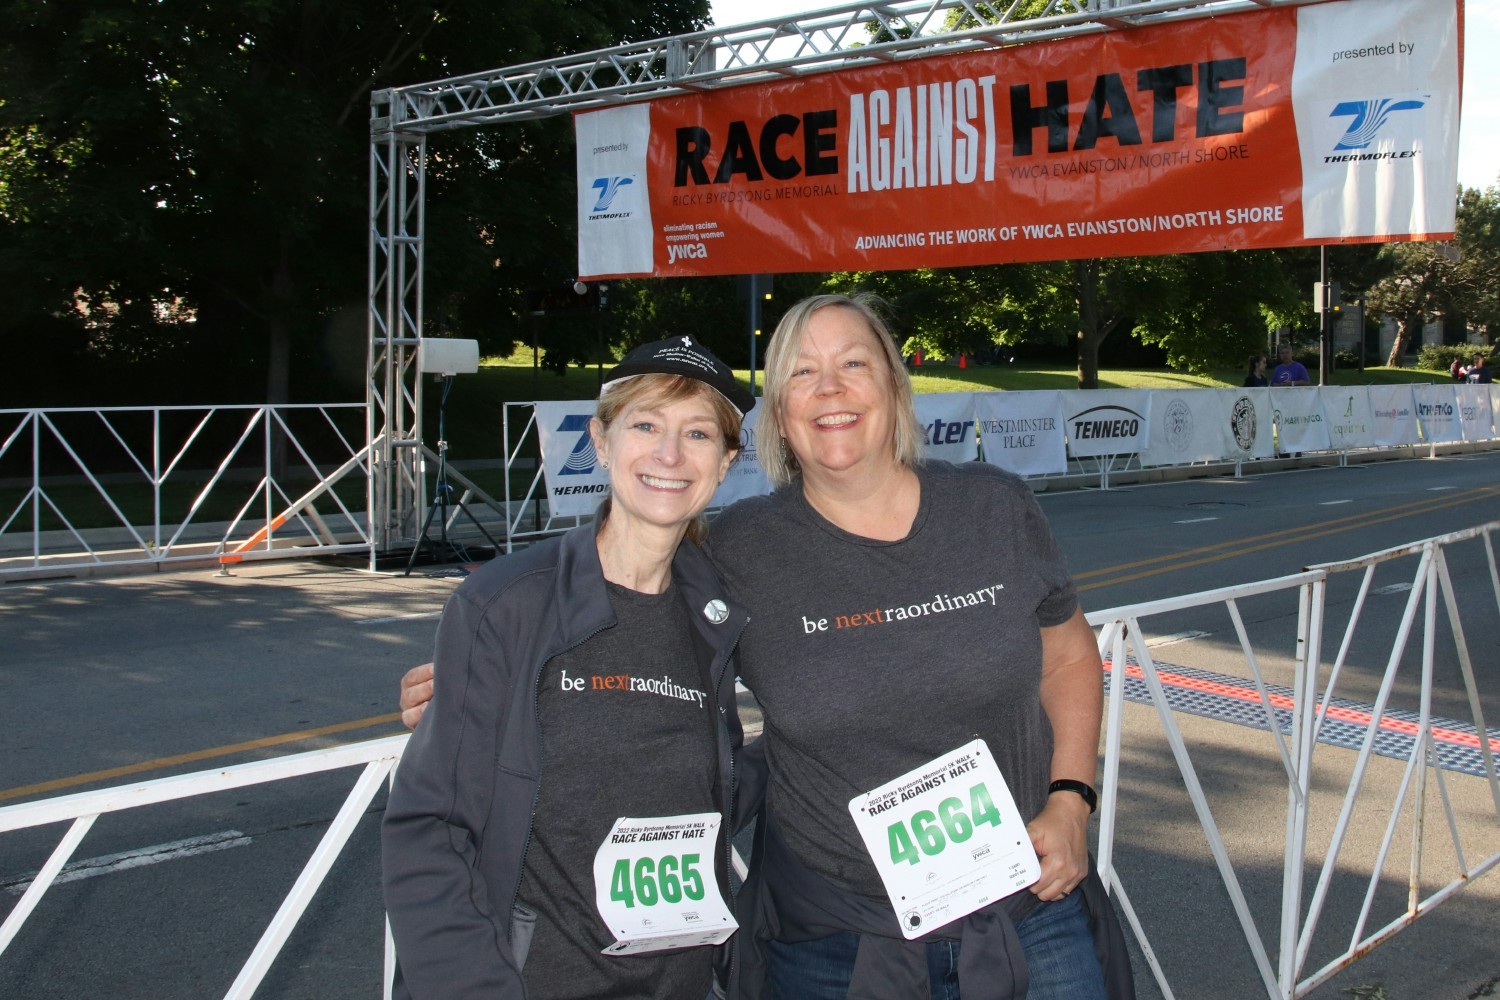 As part of Mather’s commitment to Diversity, Equity, & Inclusion, team members joined in Evanston’s Race Against Hate. 